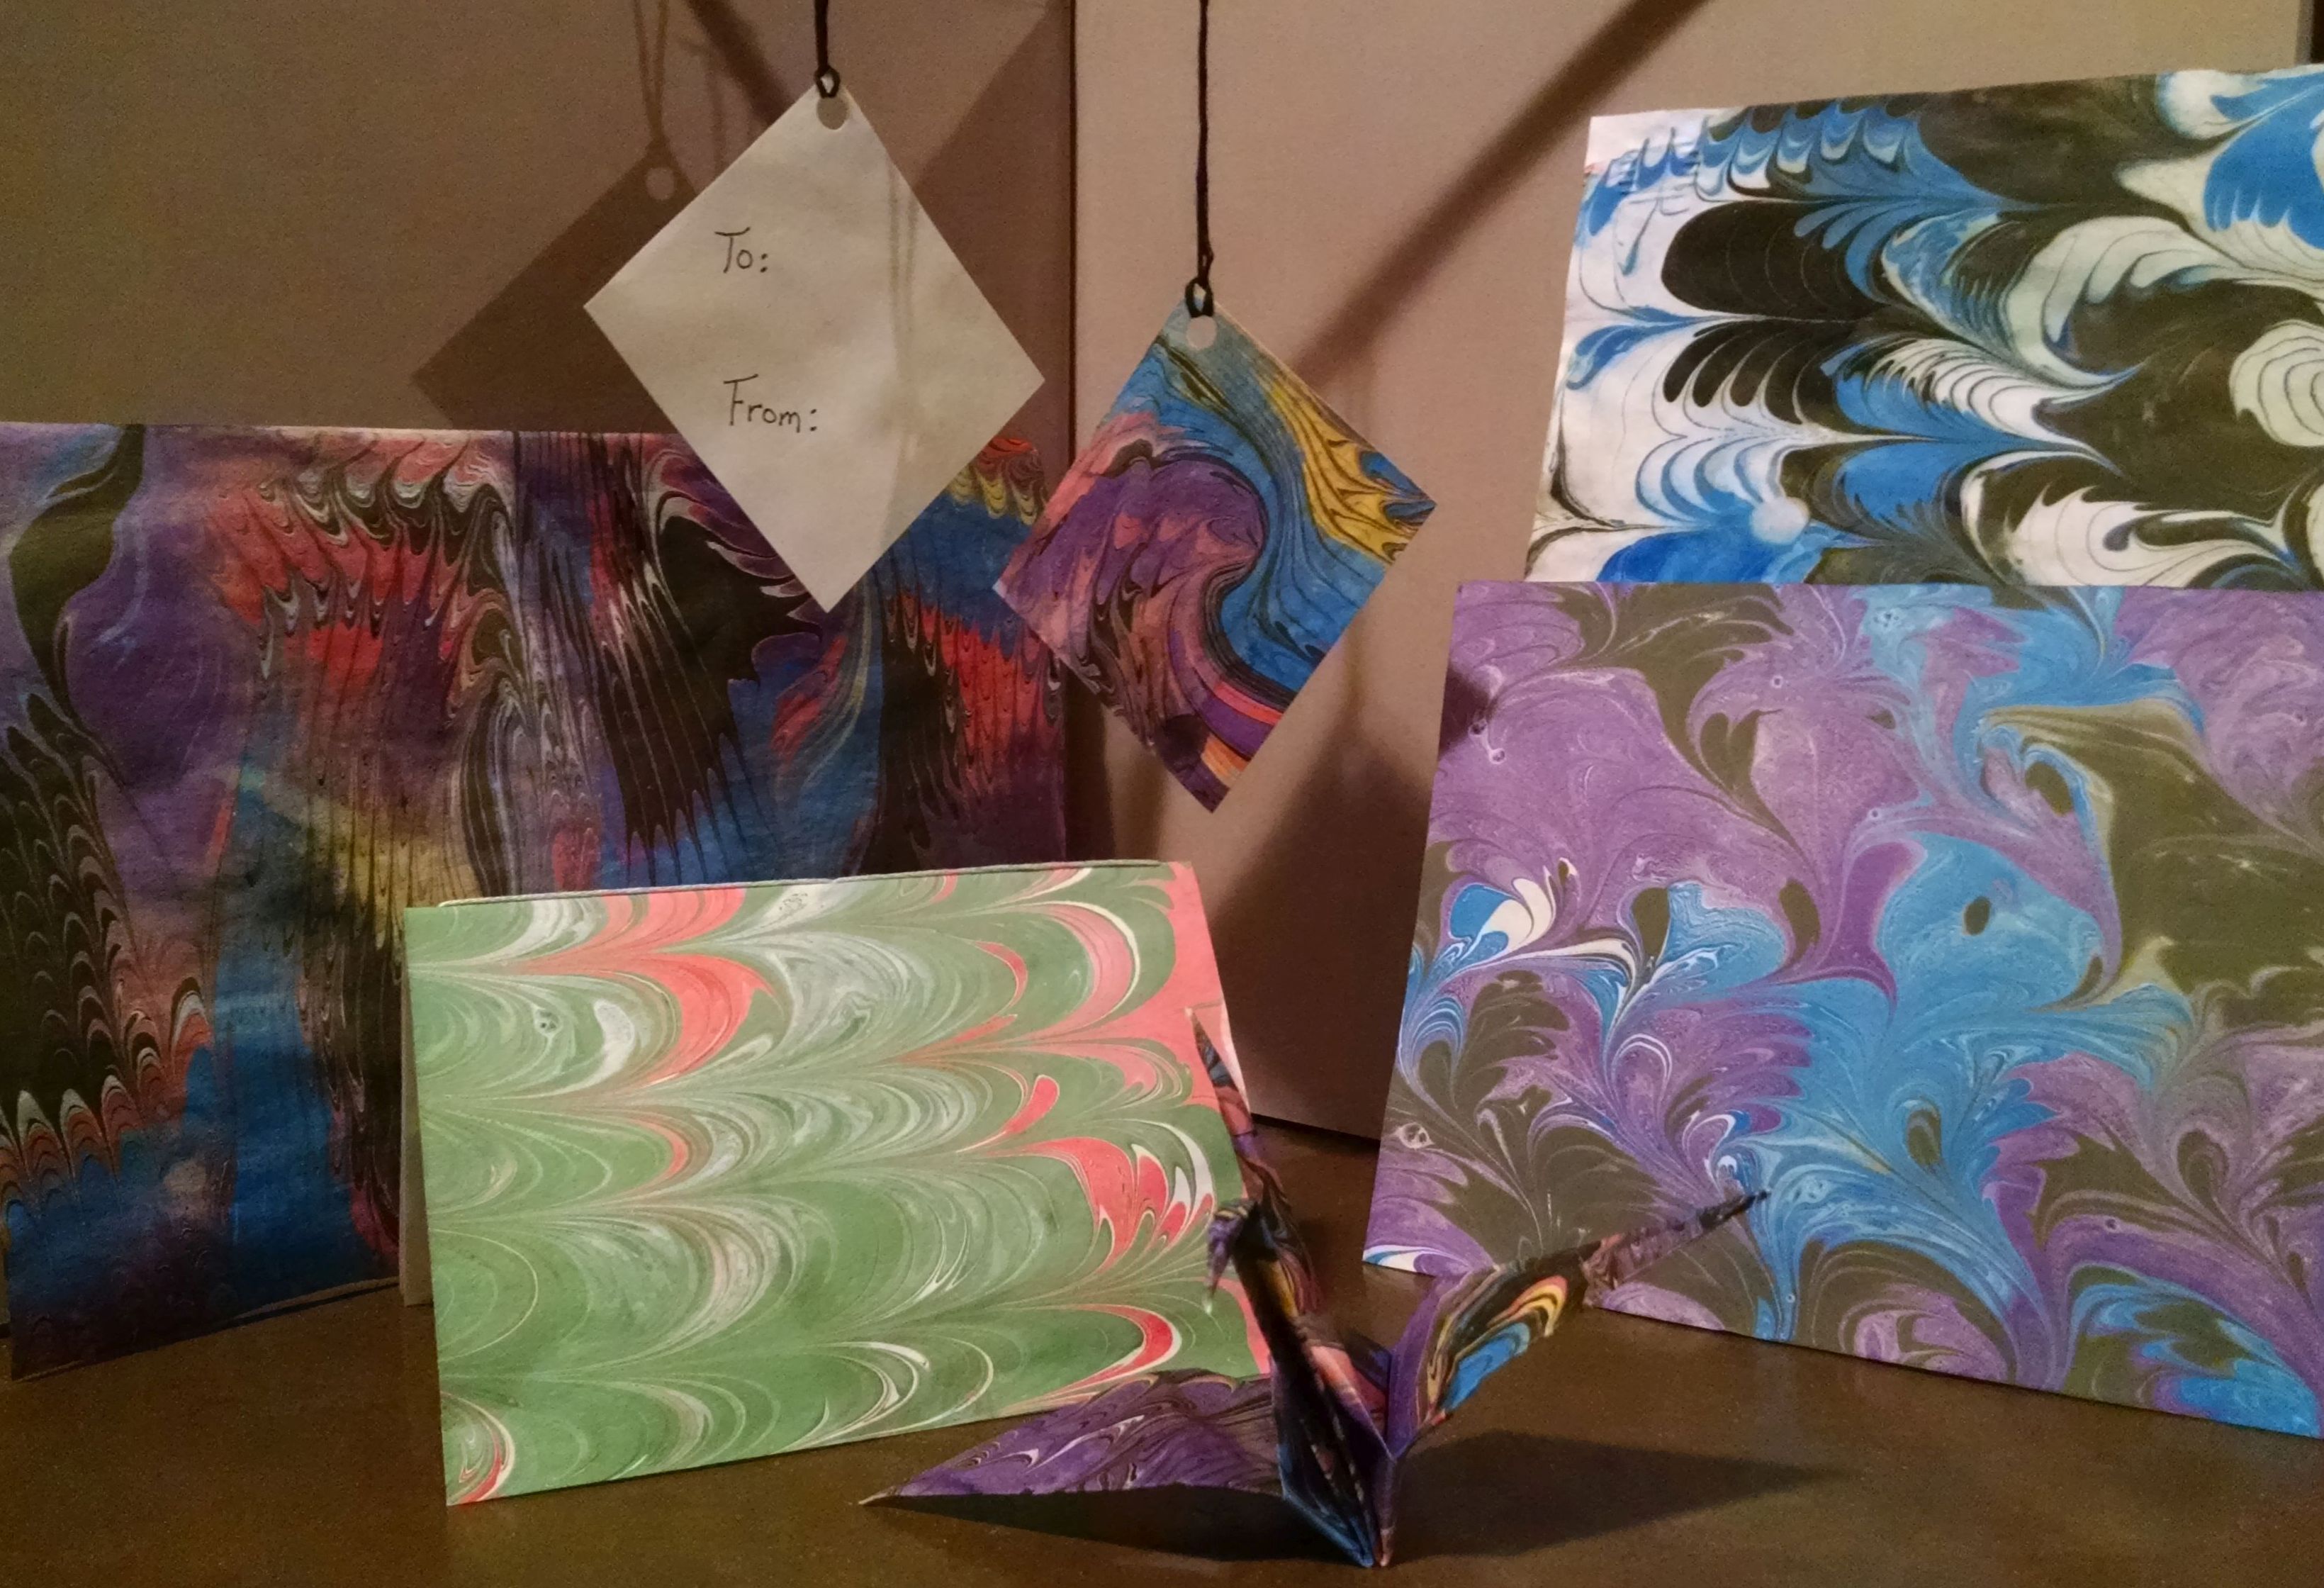 De-stress December with Marbling at Pius Library